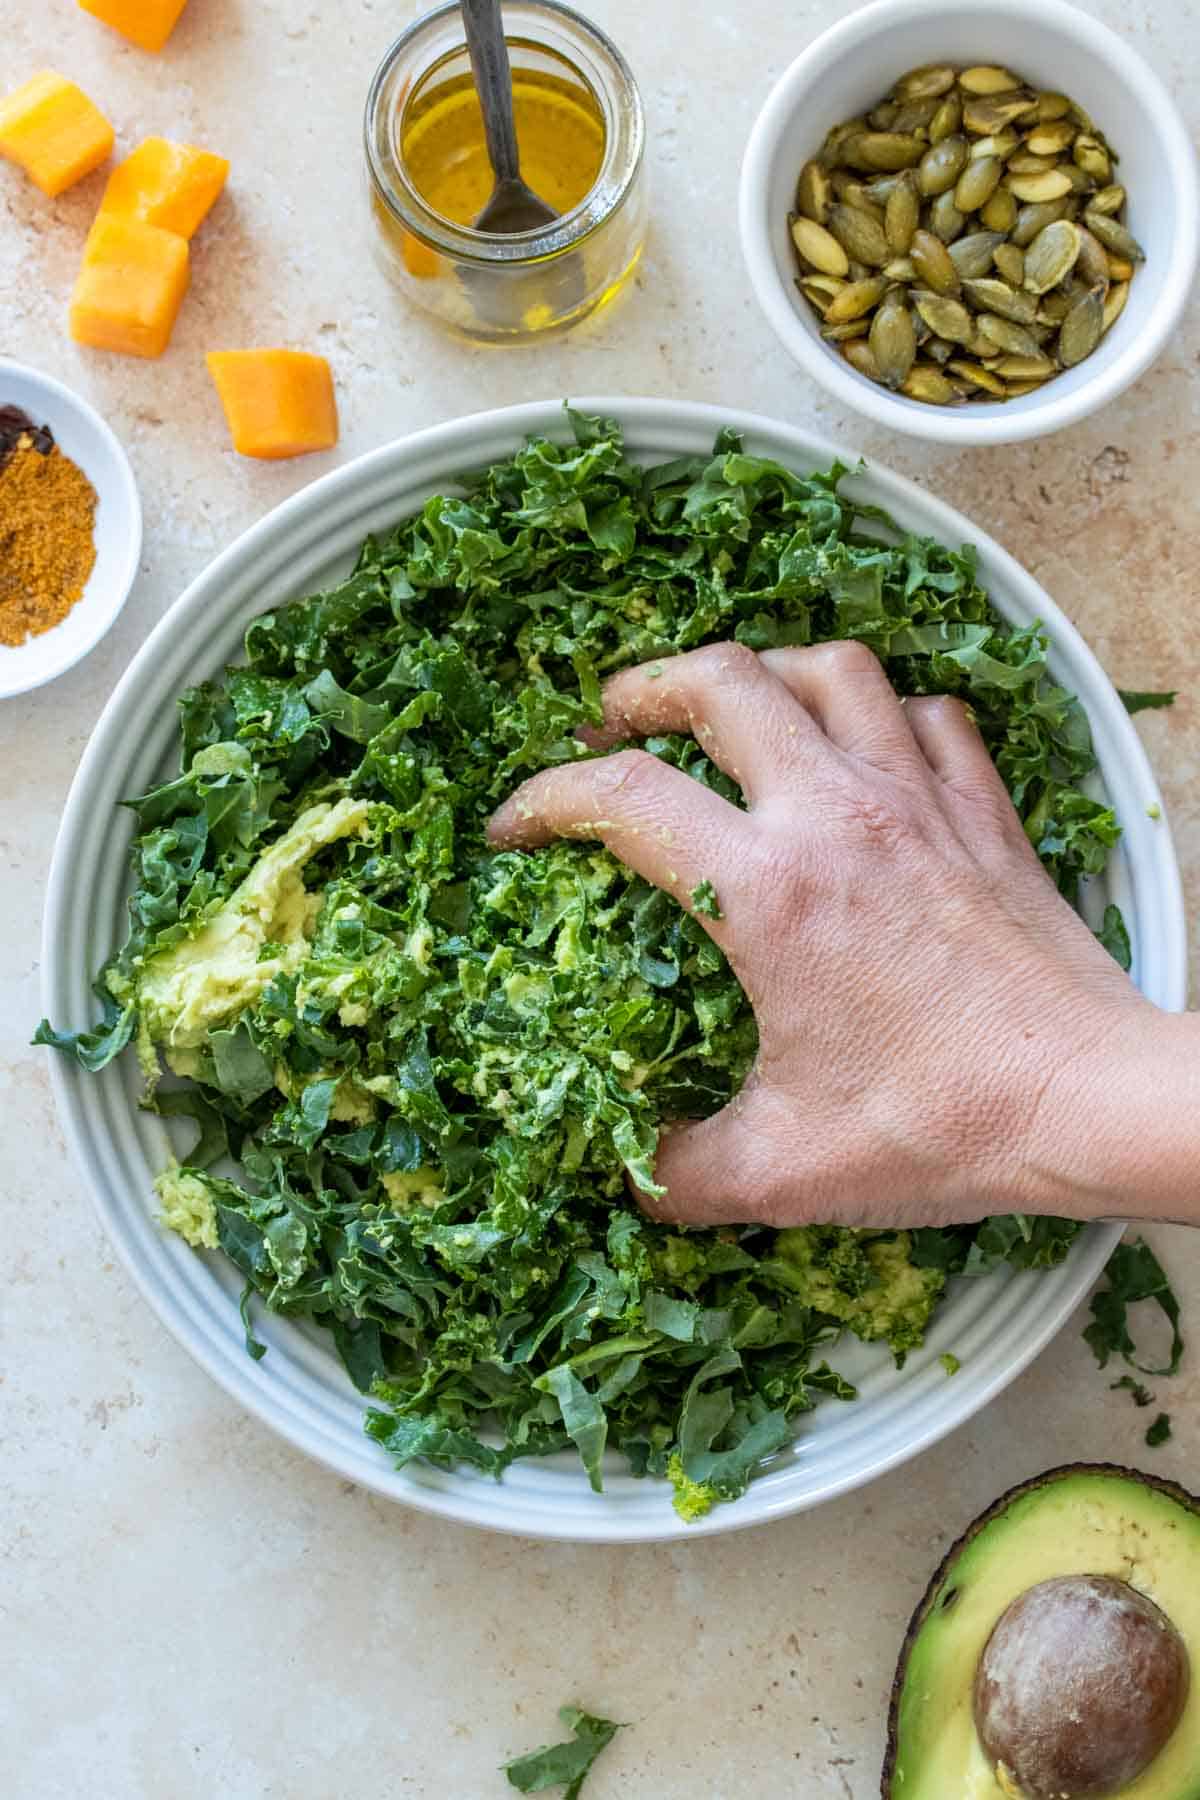 A hand massaging avocado into a shredded kale salad in a white bowl